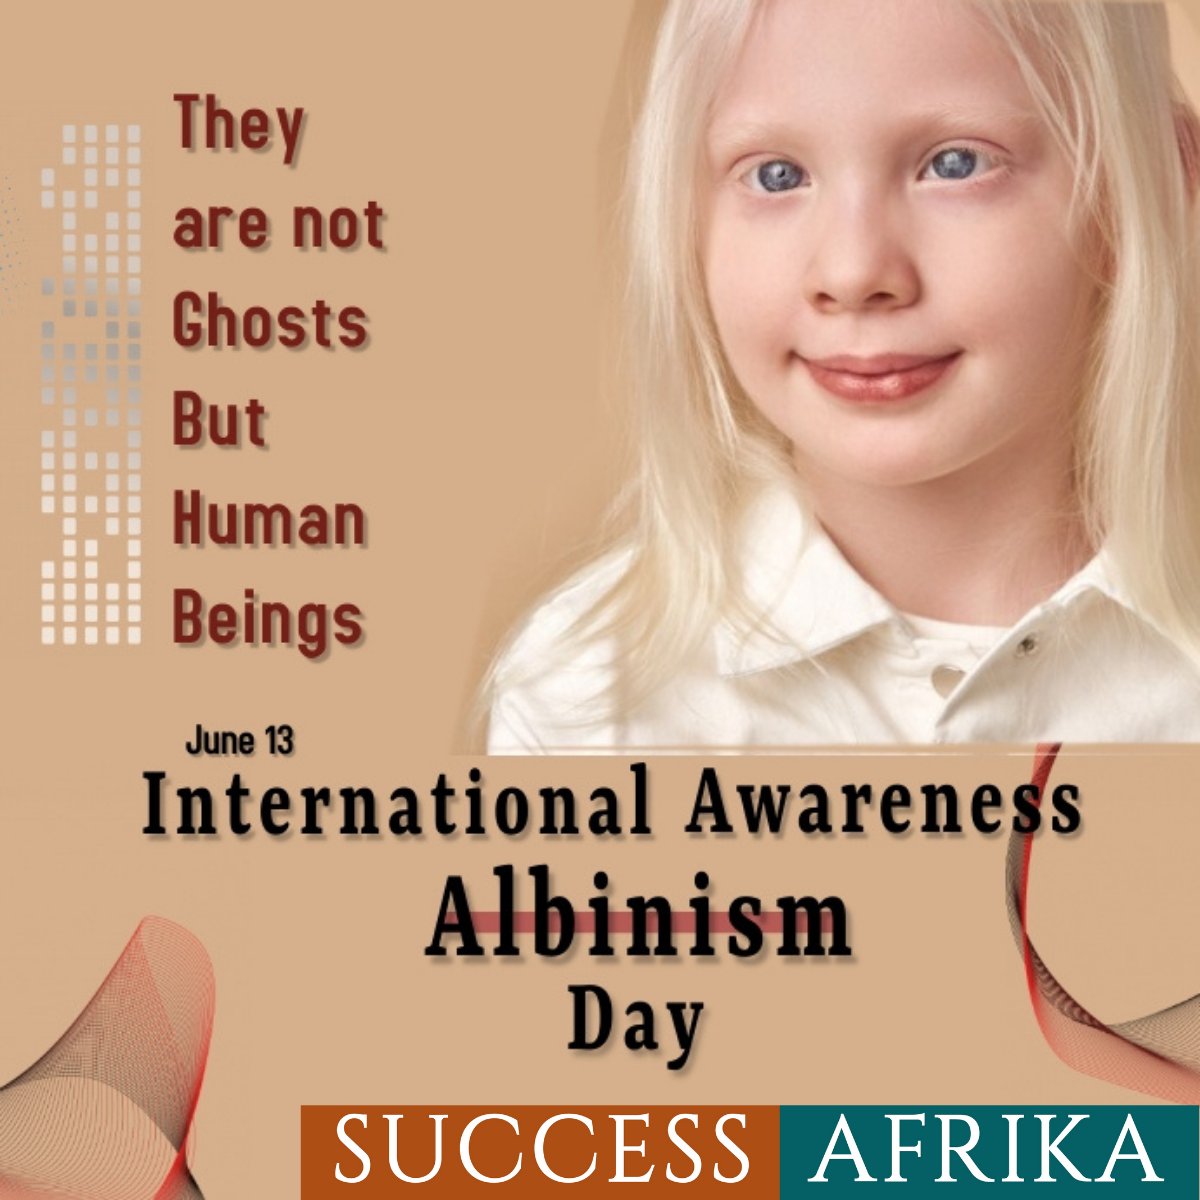 International Albinism Awareness Day tells us that they are only different shades of the same colour, and we must accept them as they are. #albinismisbeautiful #InclusionIsStrength #InclusiveFuture #AlbinismDay #successafrika #africa